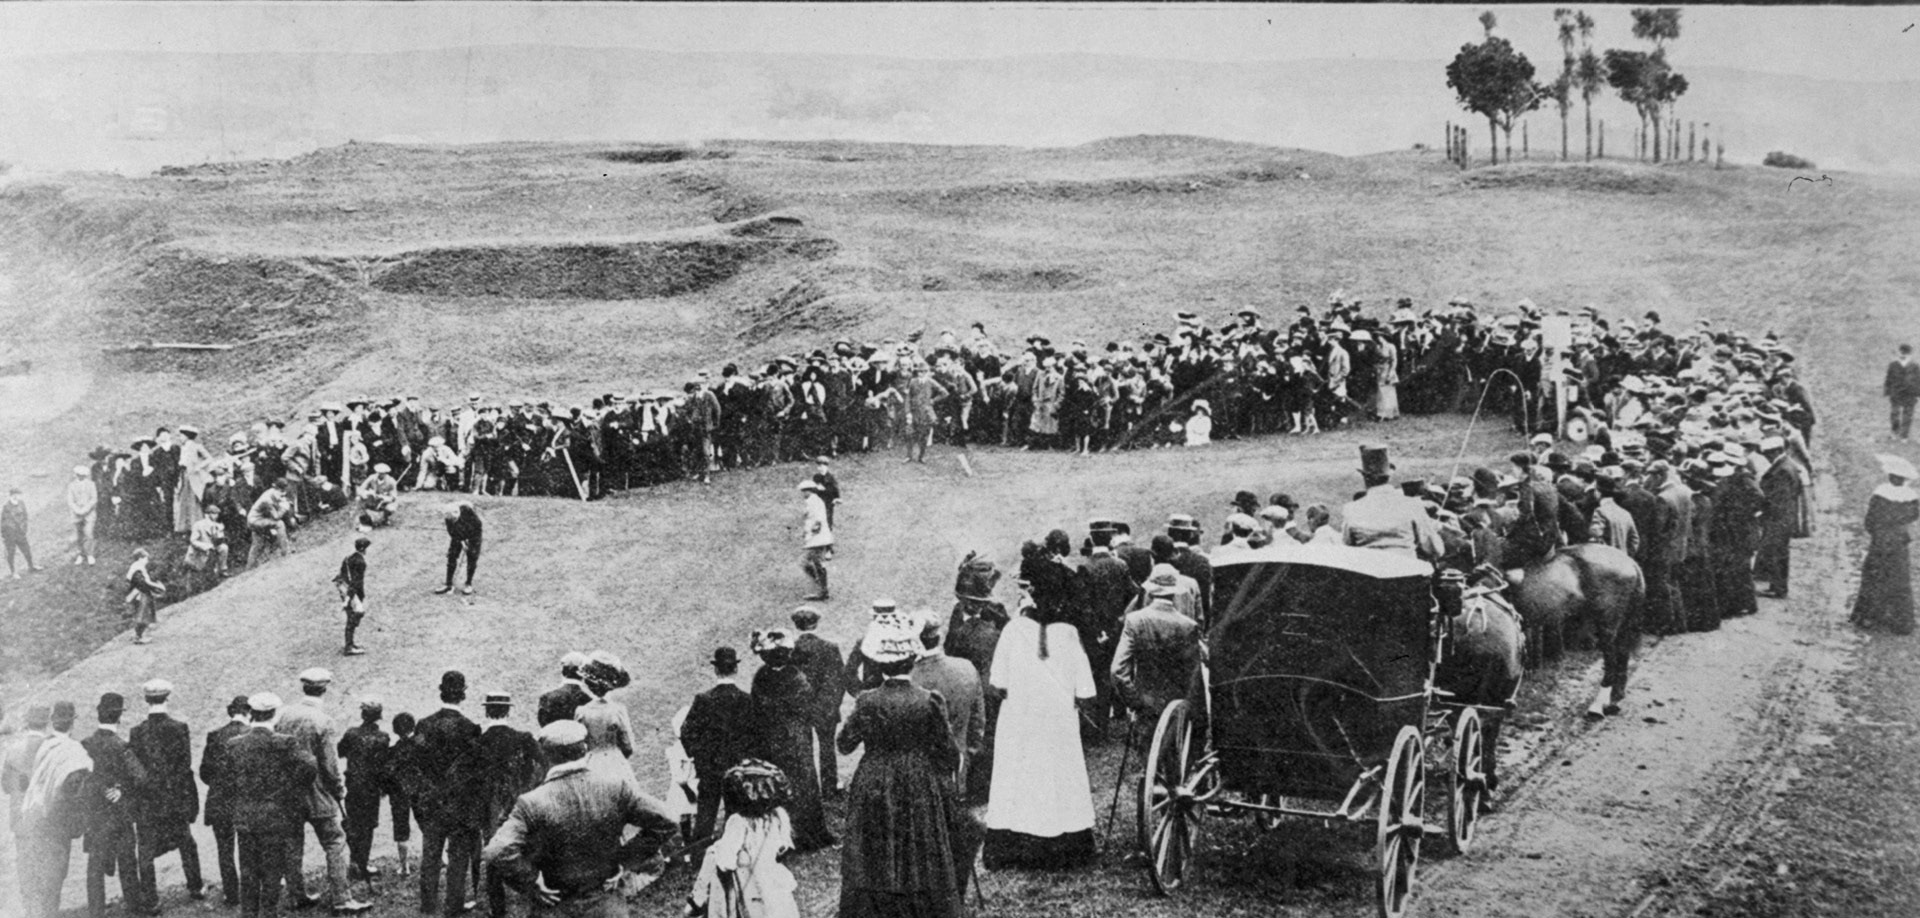 Duncan, winner of the Amateur Championship of New Zealand, putting on the Jacob's Ladder Green at Maungakiekie One Tree Hill, September 18, 1909. Auckland Libraries Heritage Collections AWNS-19090923-1-1